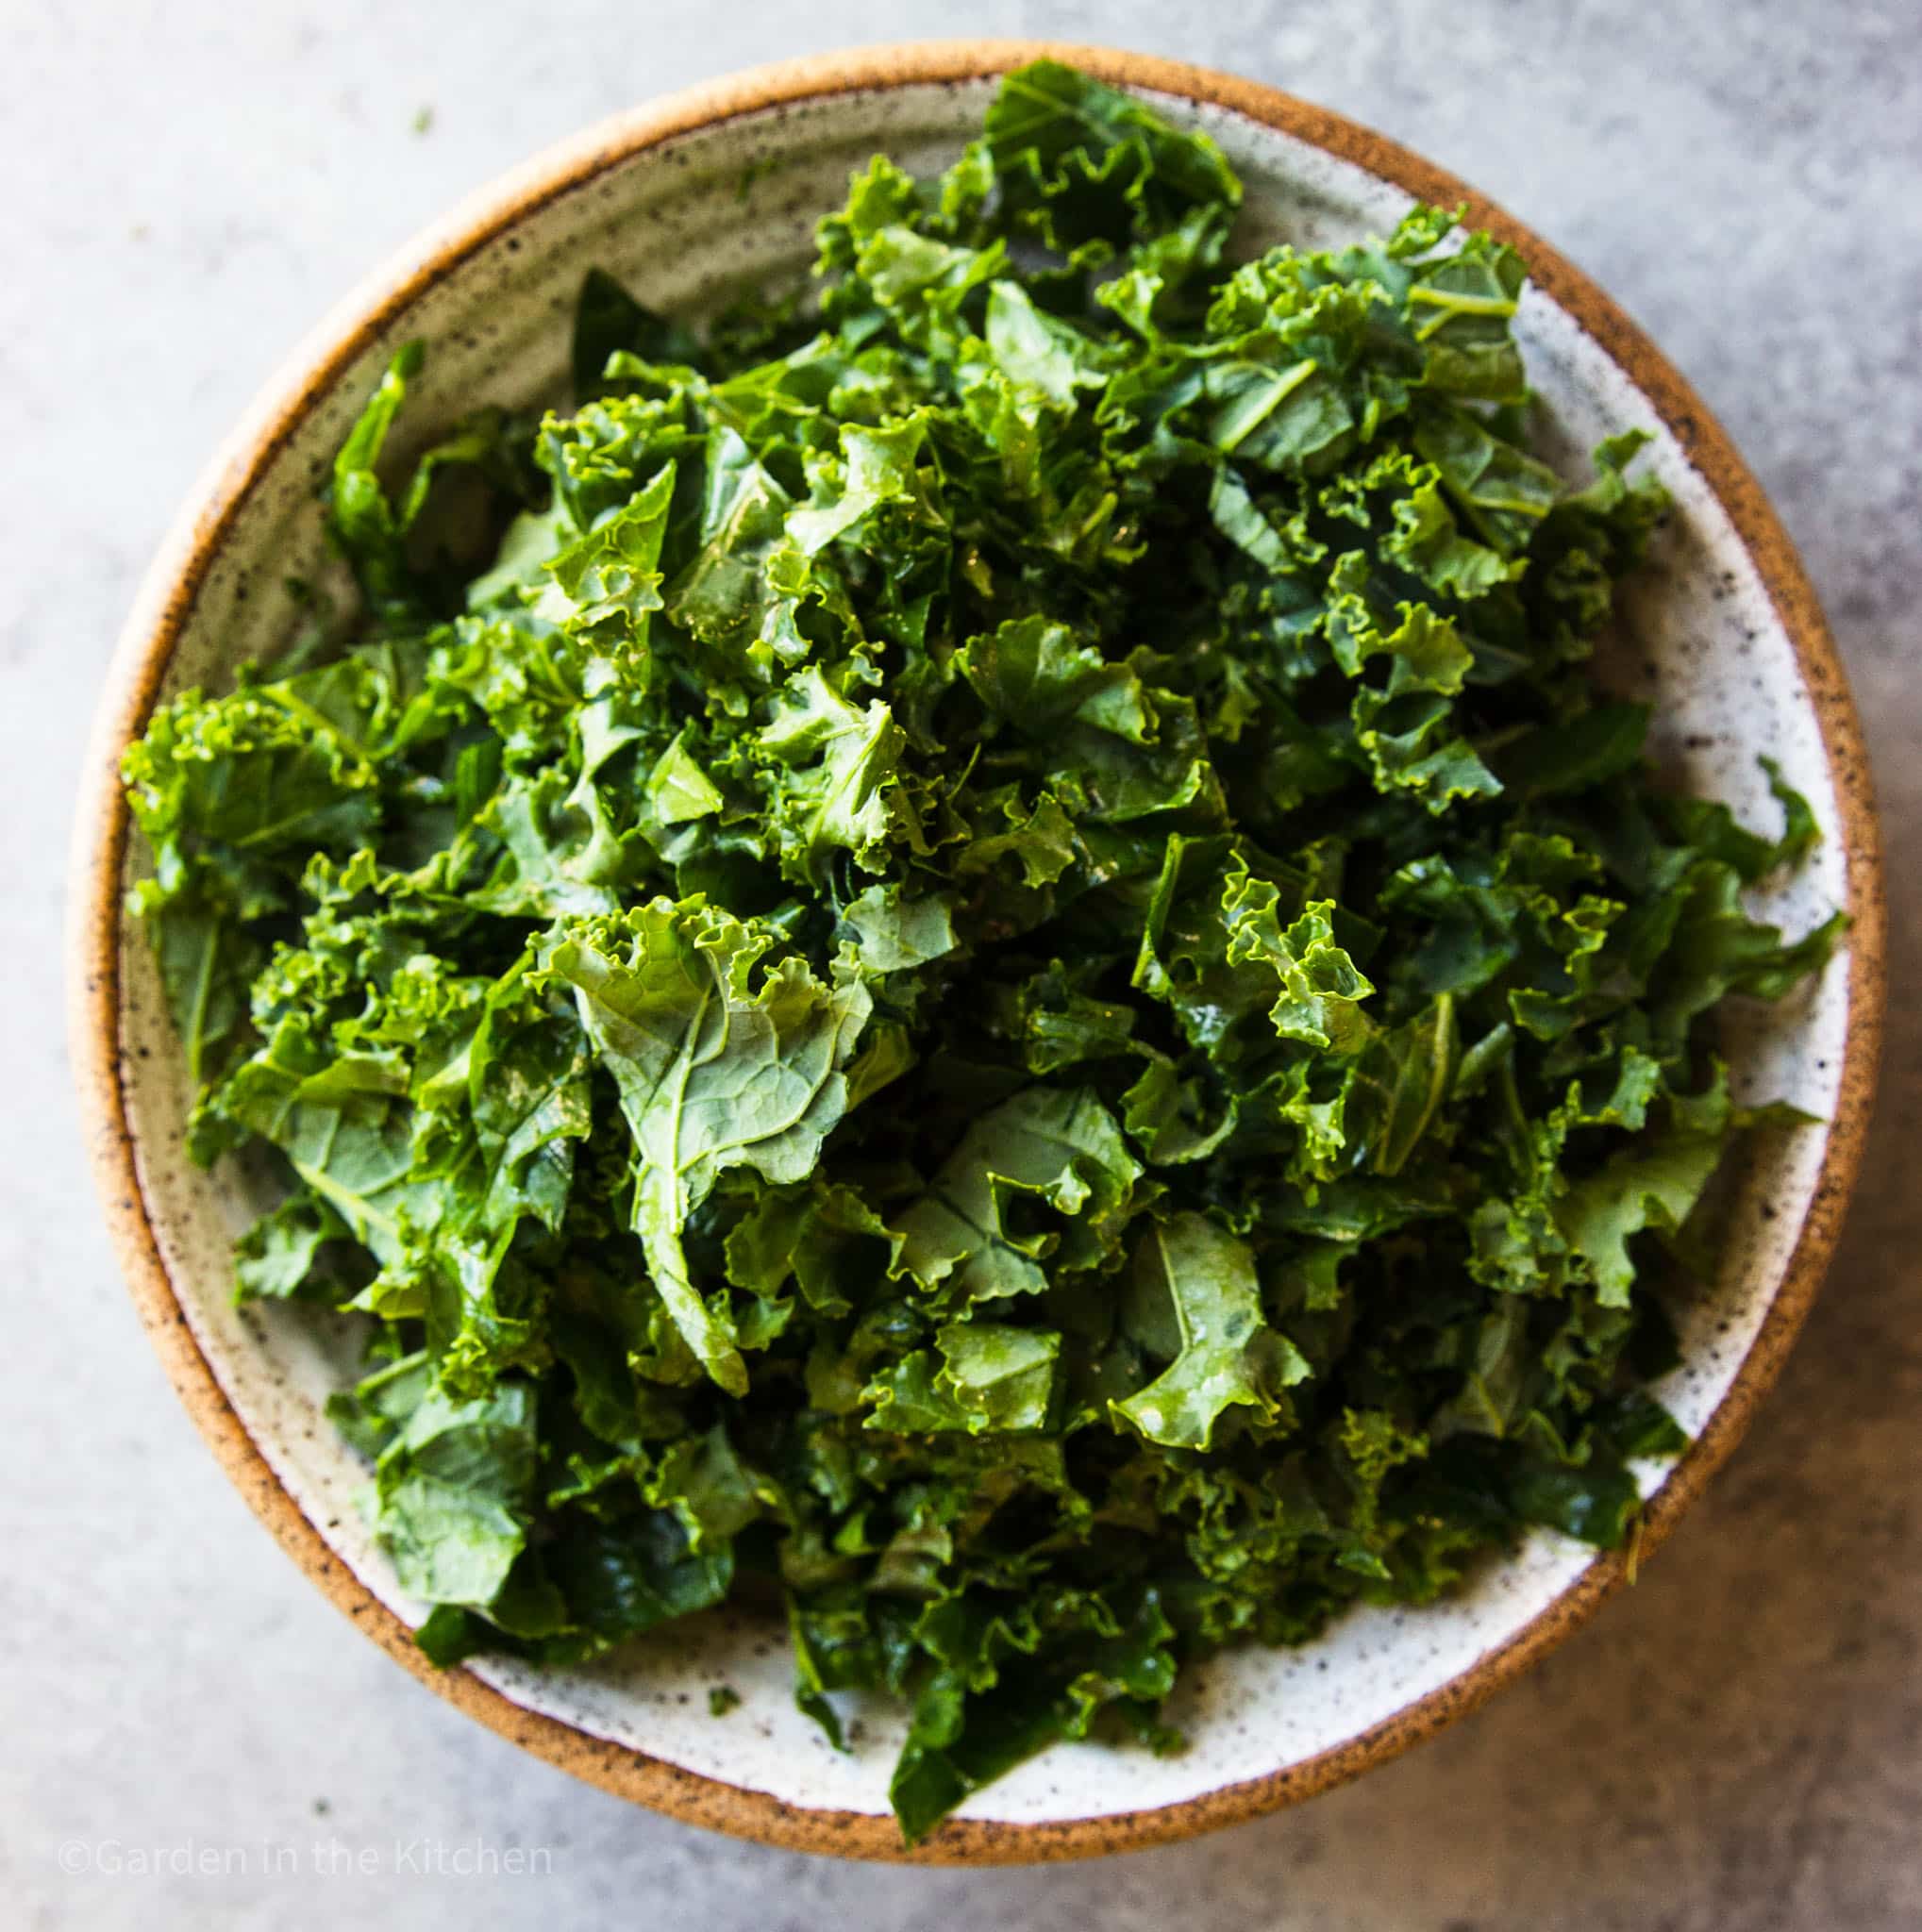 Raw kale in a round bowl.